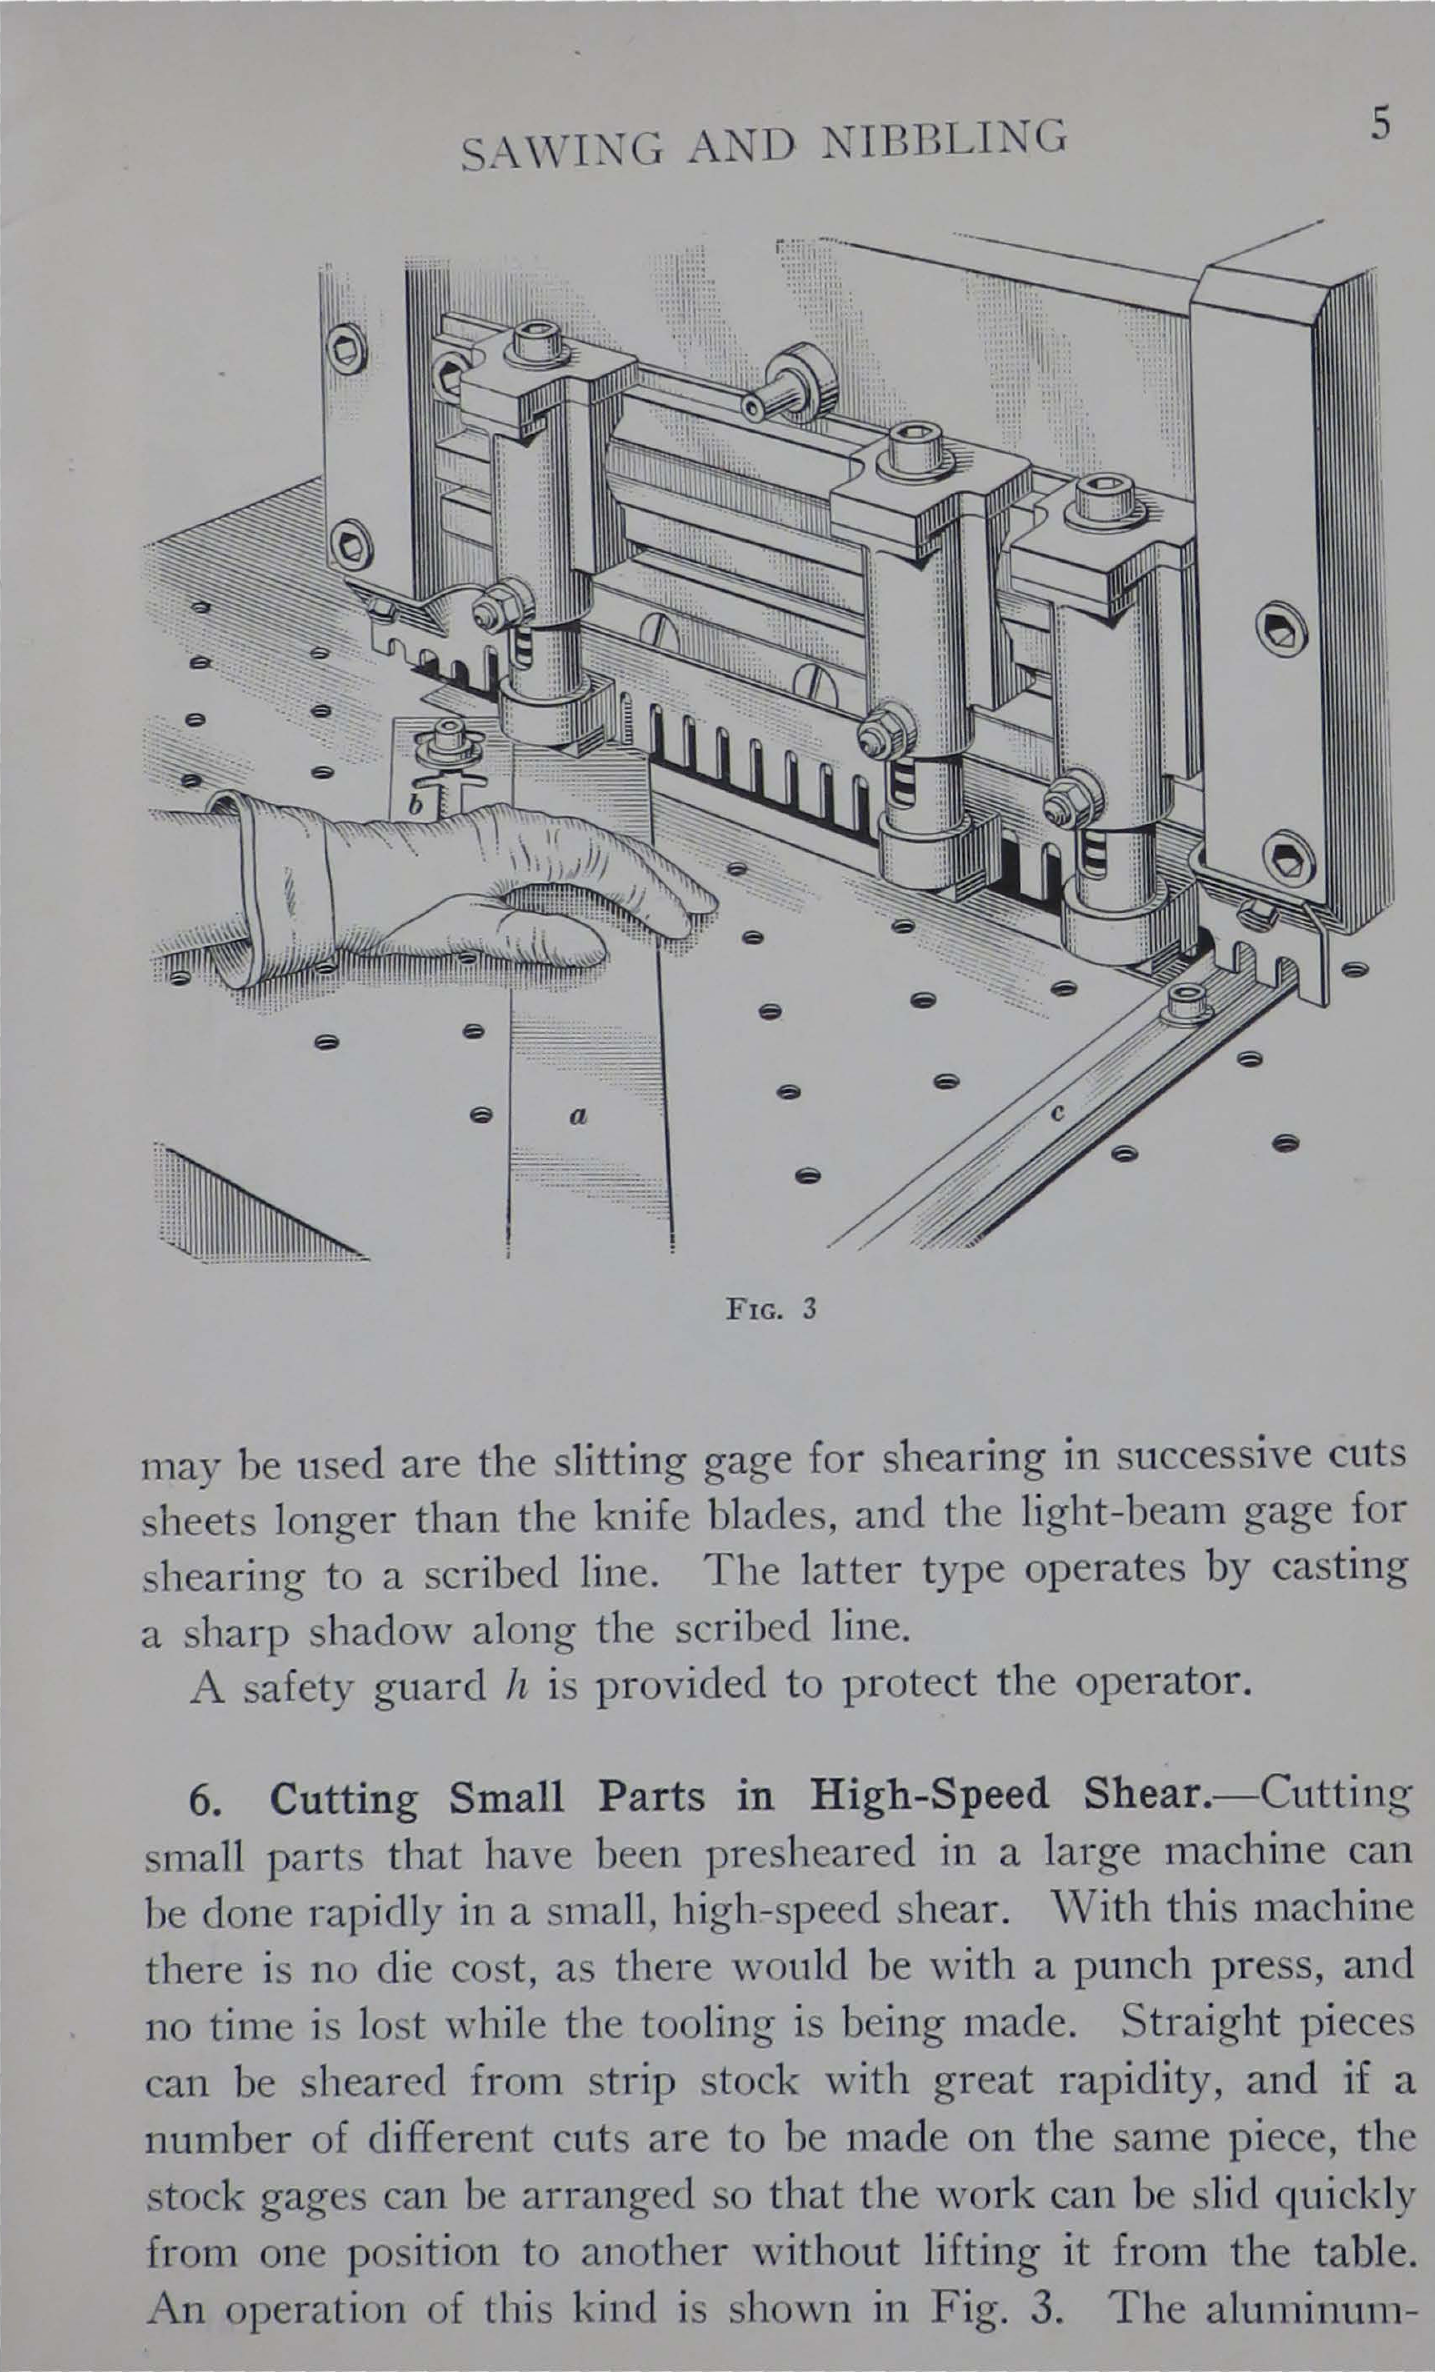 Sample page 7 from AirCorps Library document: Blanking and Punching - Blanking by Shearing, Sawing, and Nibbling - Bureau of Aeronautics